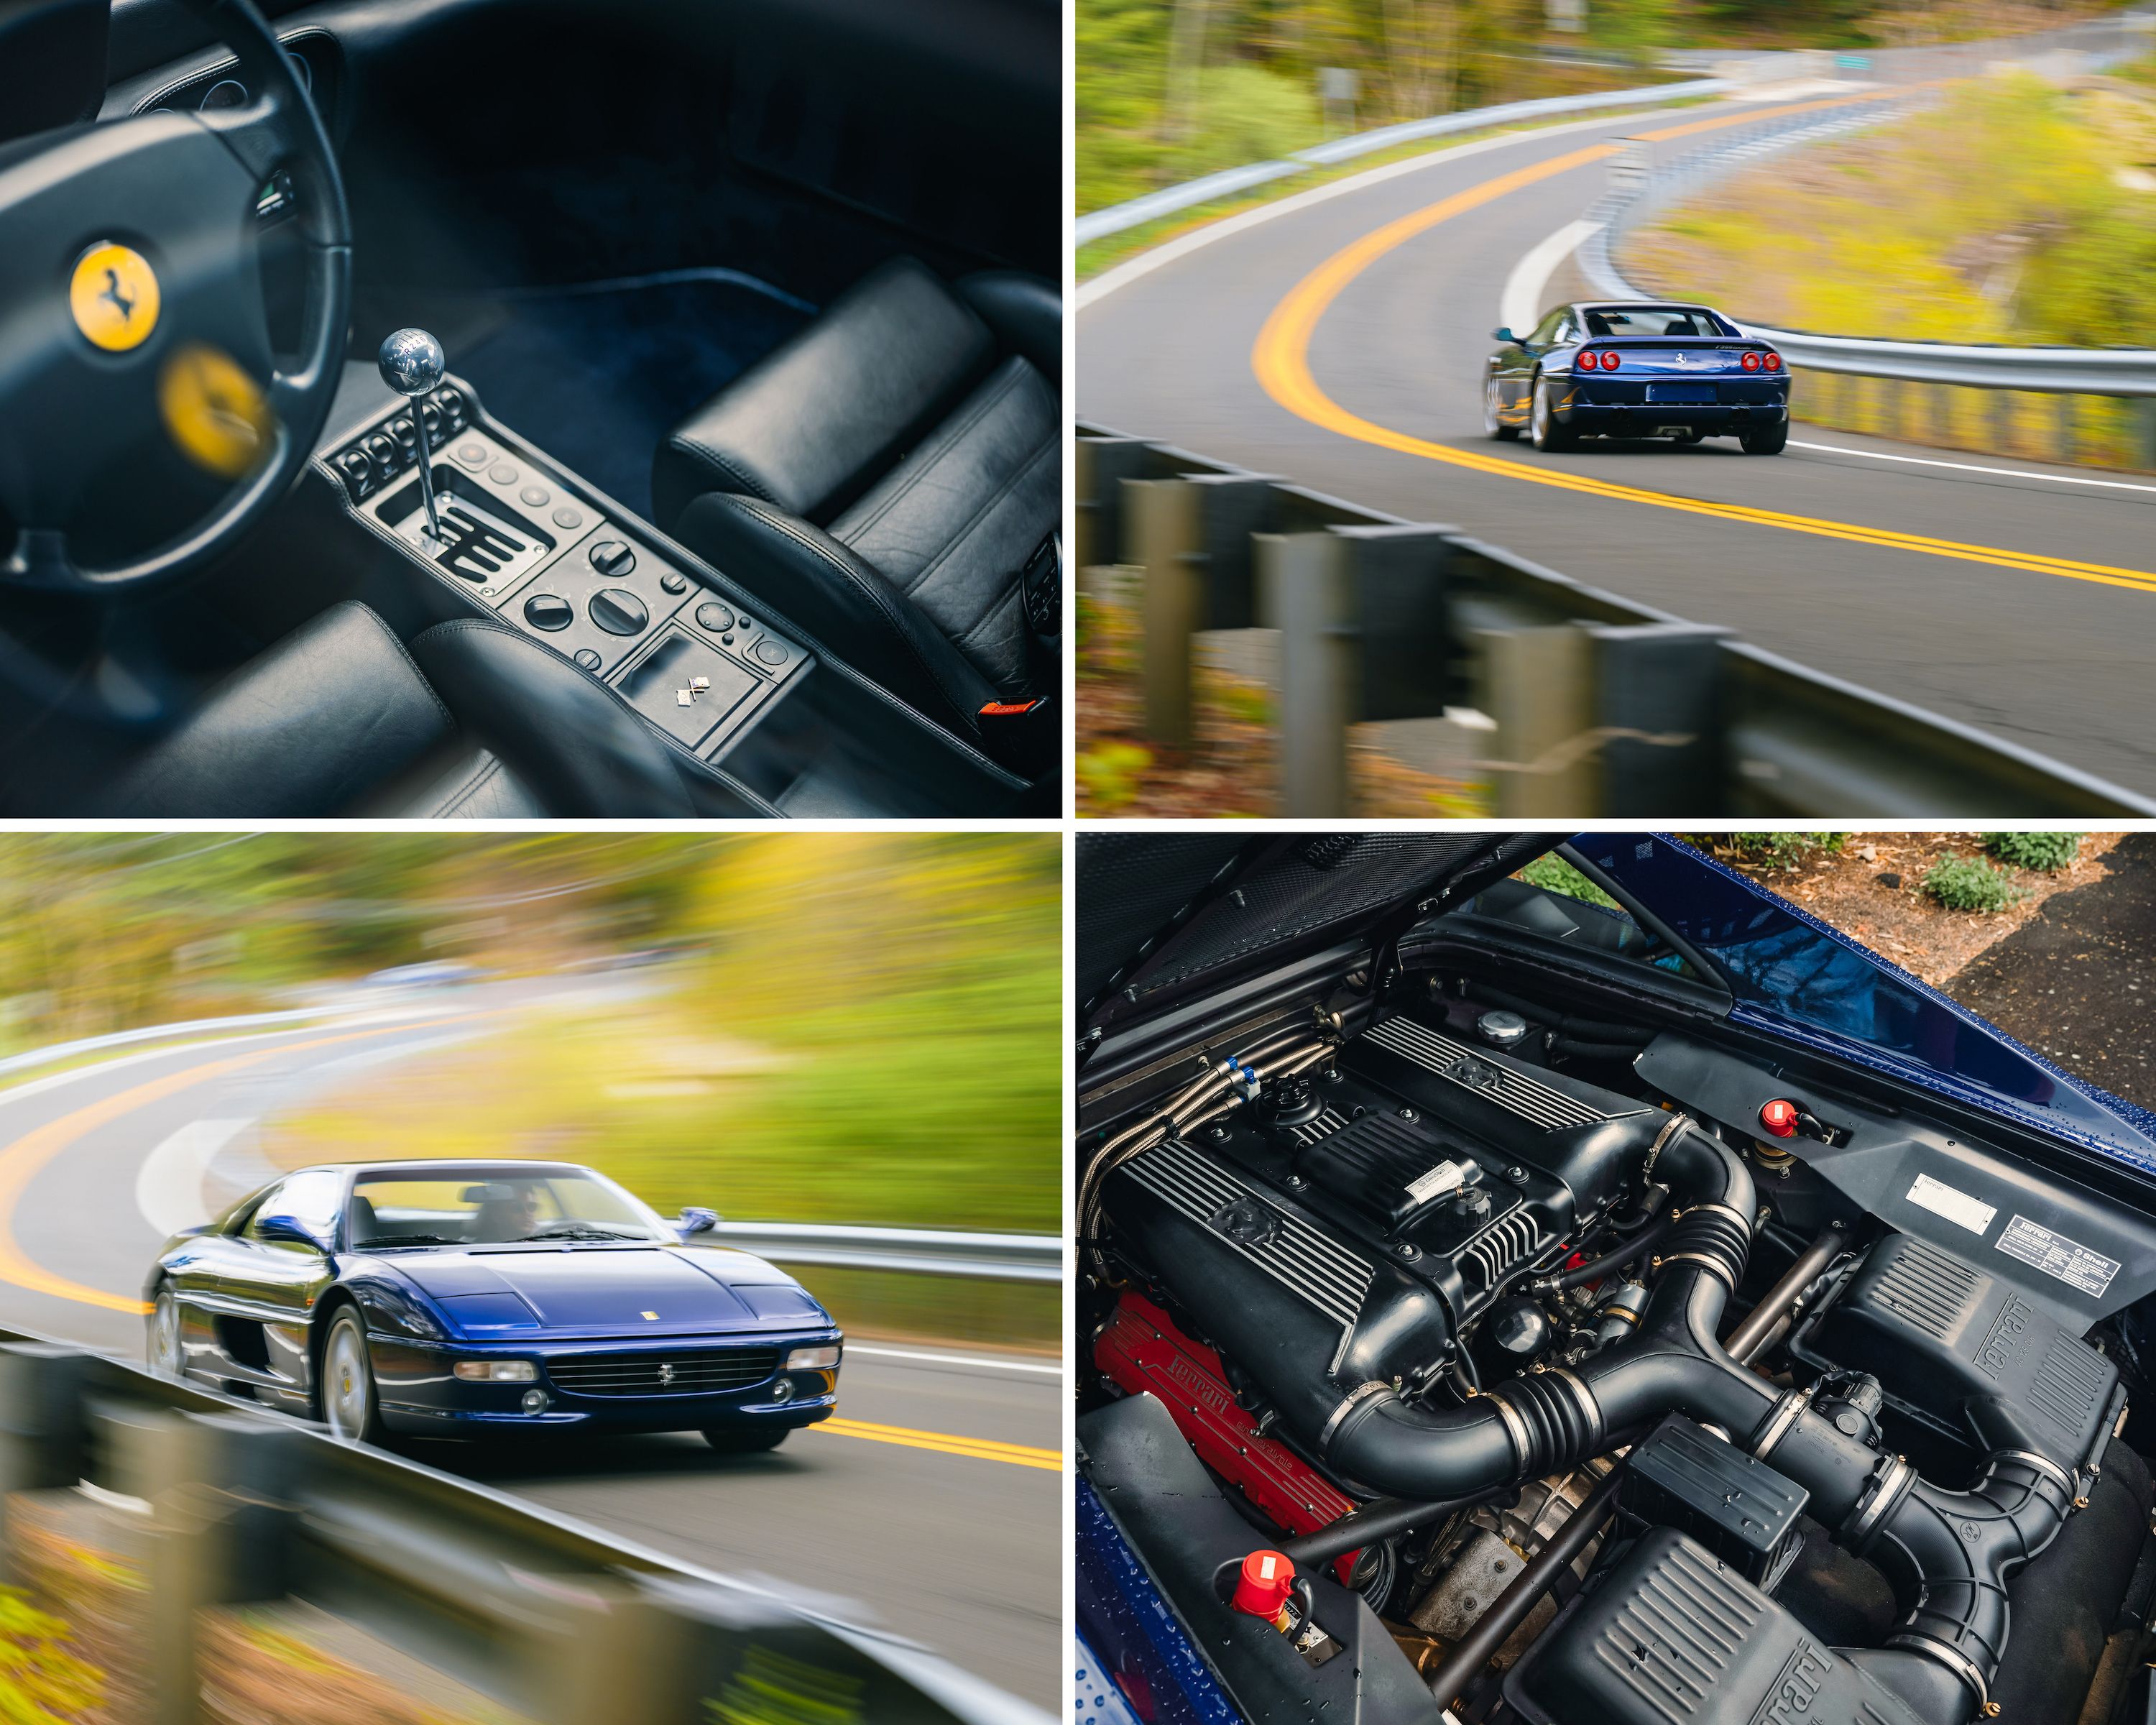 Ferrari F355 Is the Perfect One-Time Supercar Experience